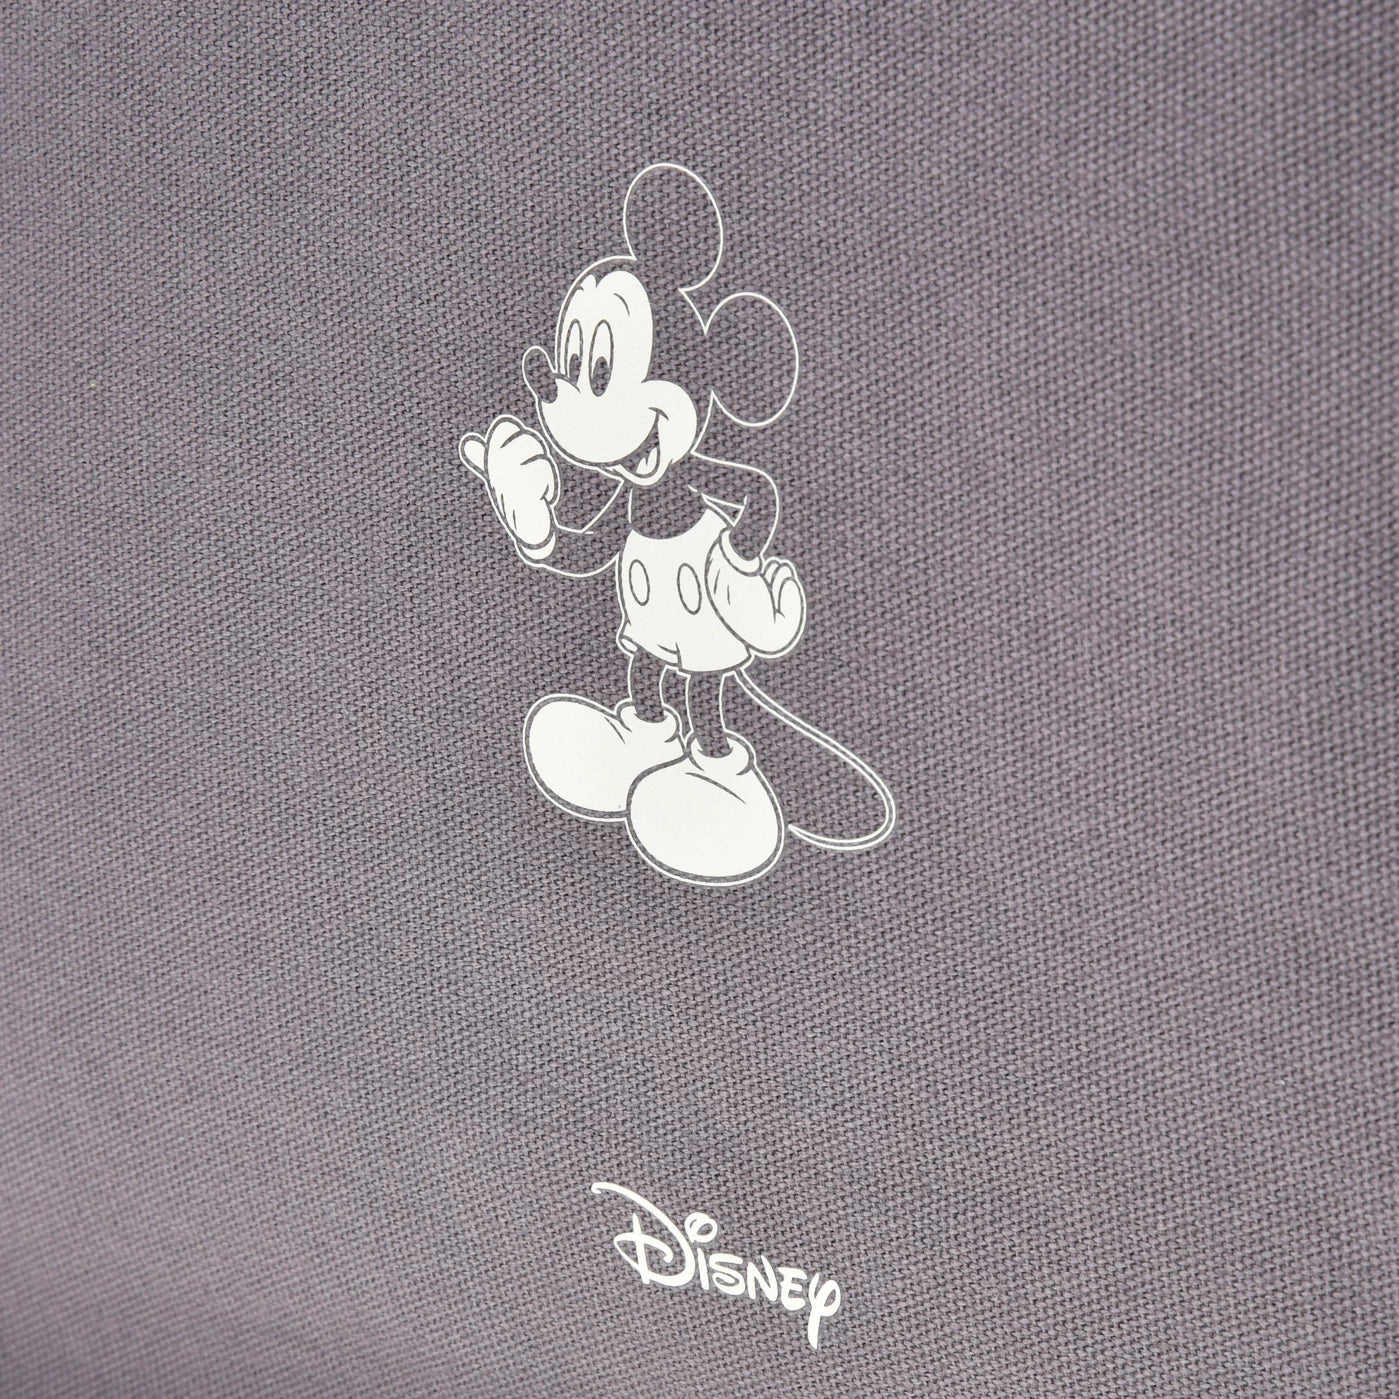 HKDL - Mickey tote bag logo(TOTE BAG Collection)【Ready Stock】